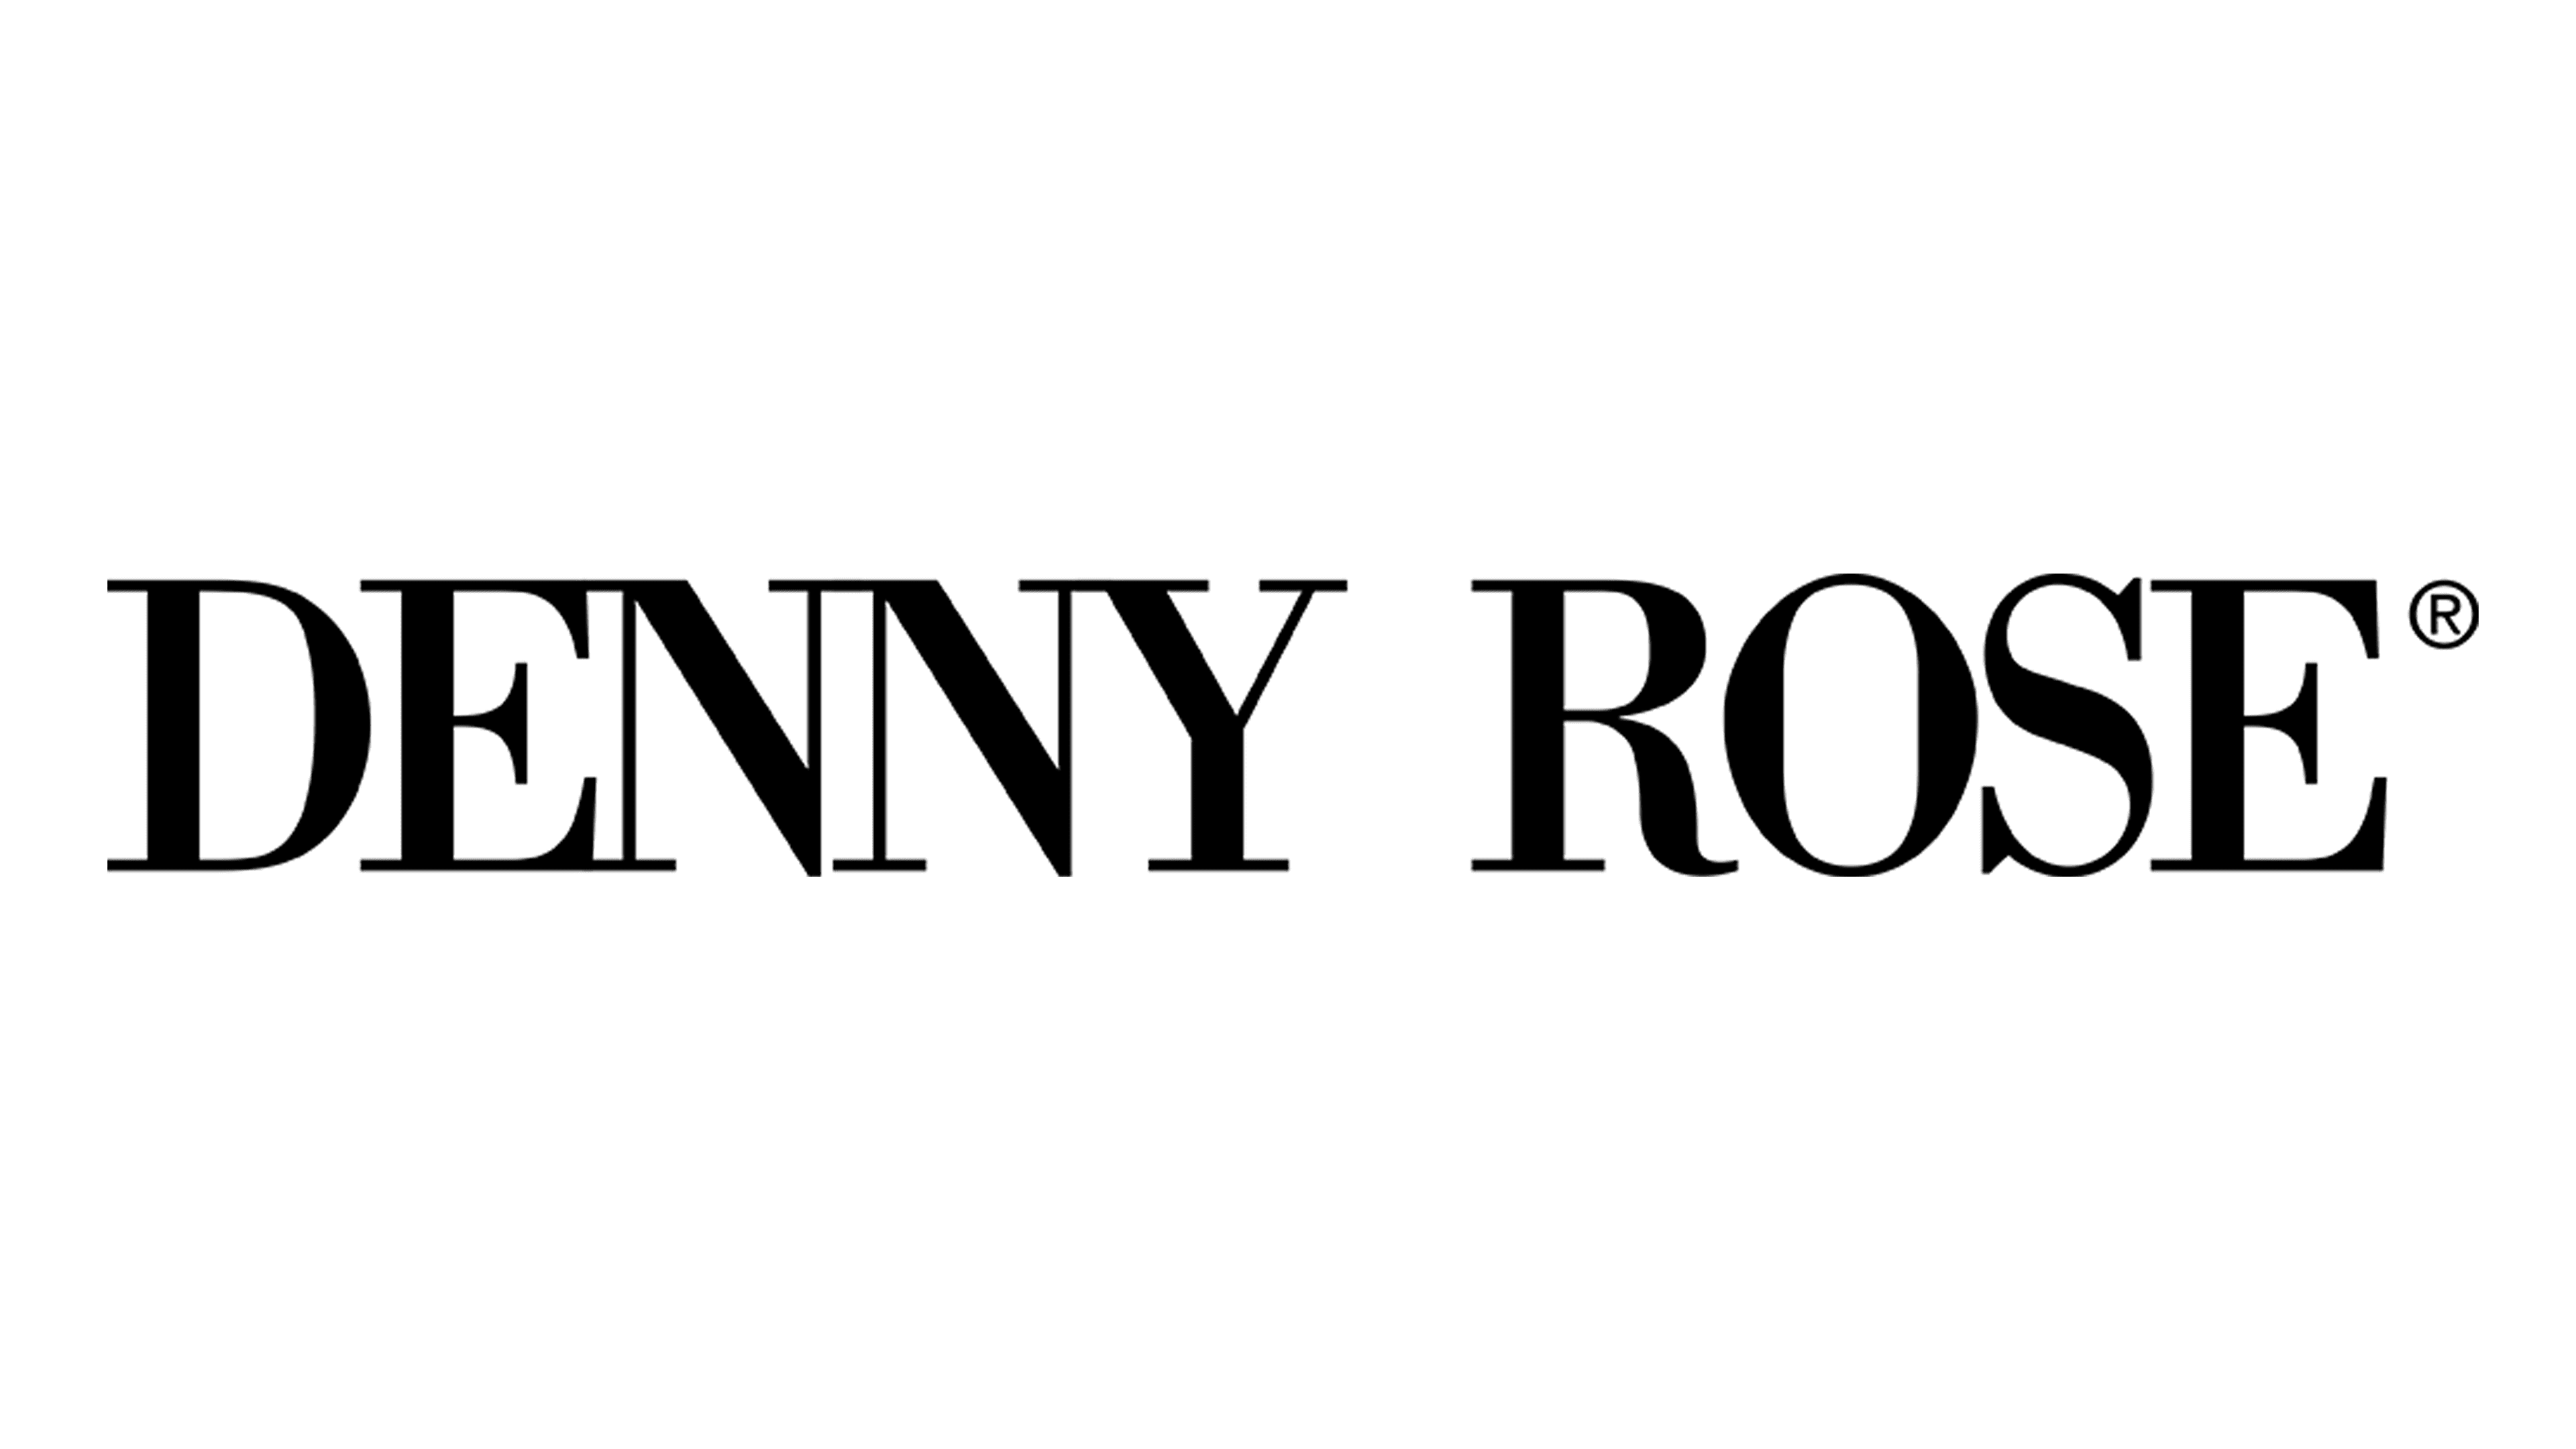 exotic ghost Pedigree Denny Rose Logo and symbol, meaning, history, PNG, brand